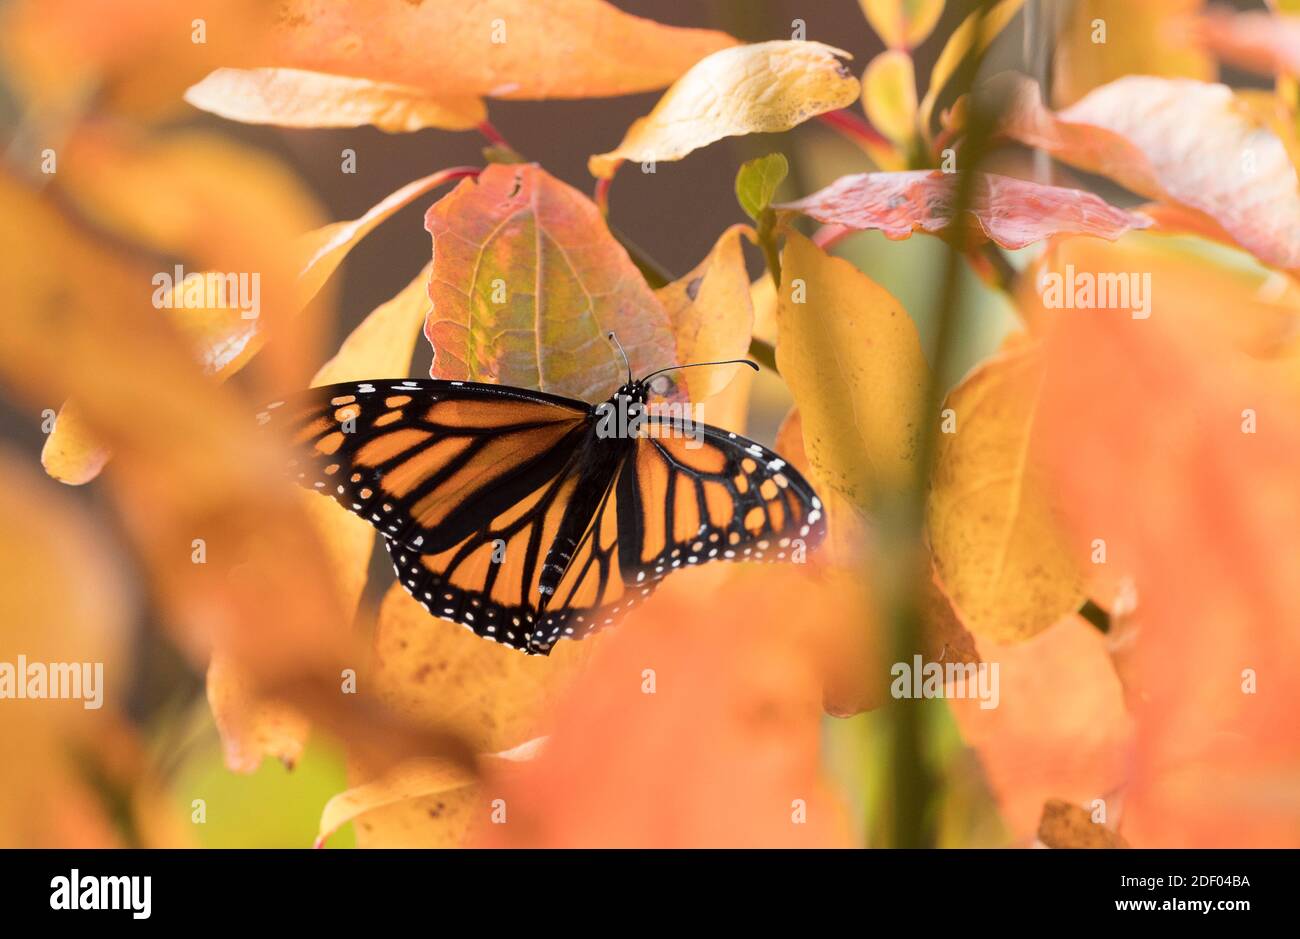 A monarch butterfly rests on an orange leaf. Stock Photo